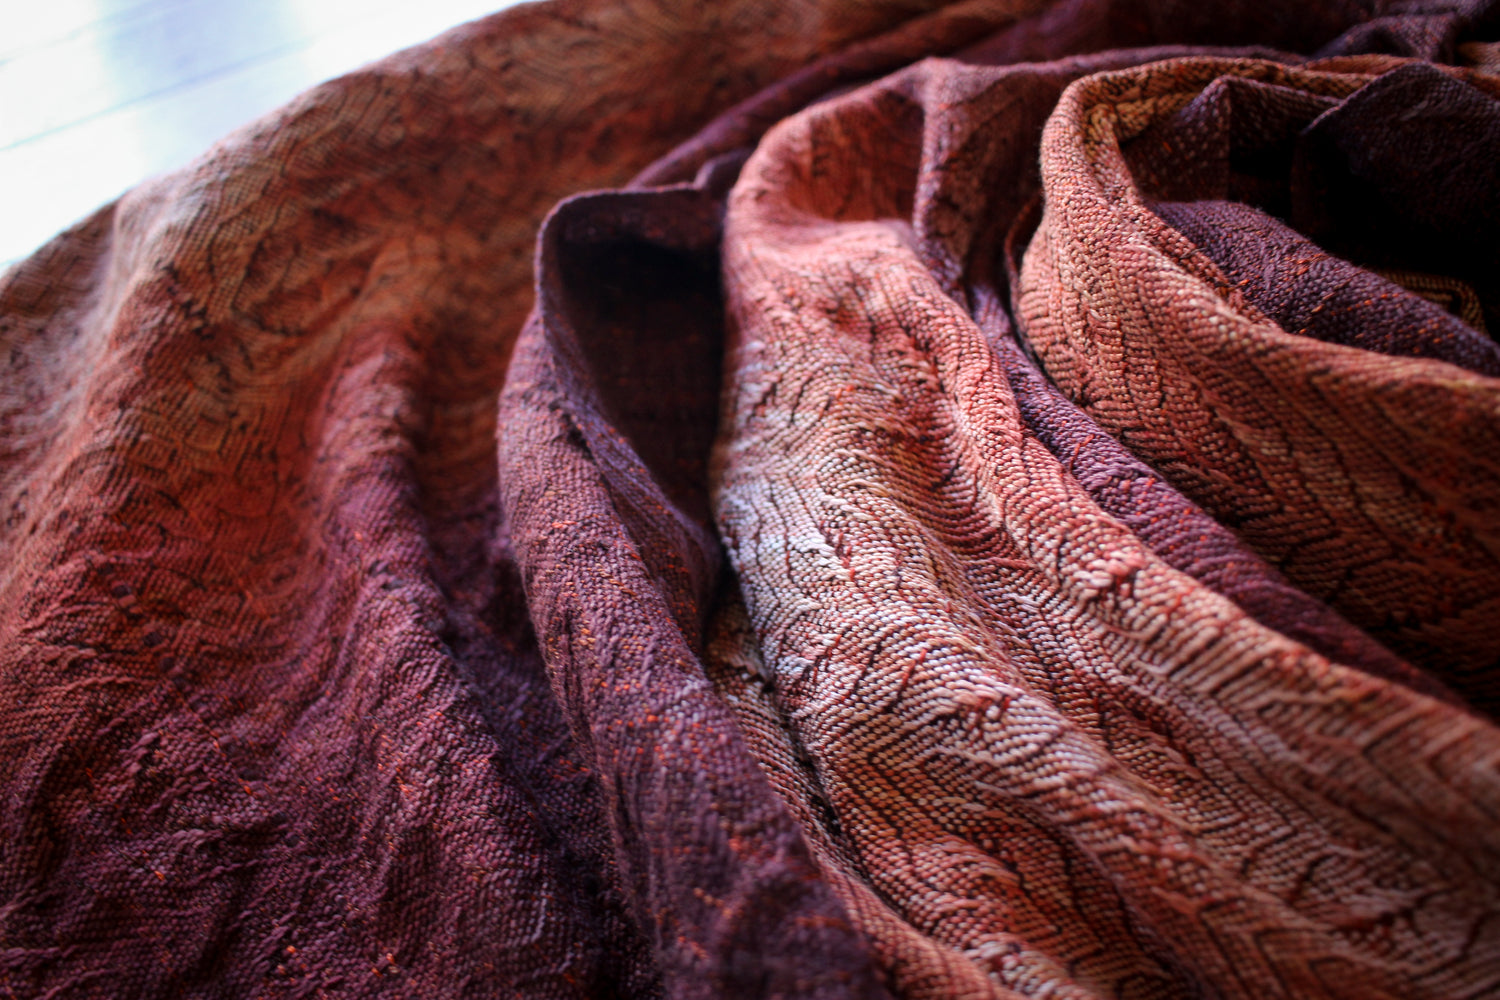 Handwoven fabric in warm shades